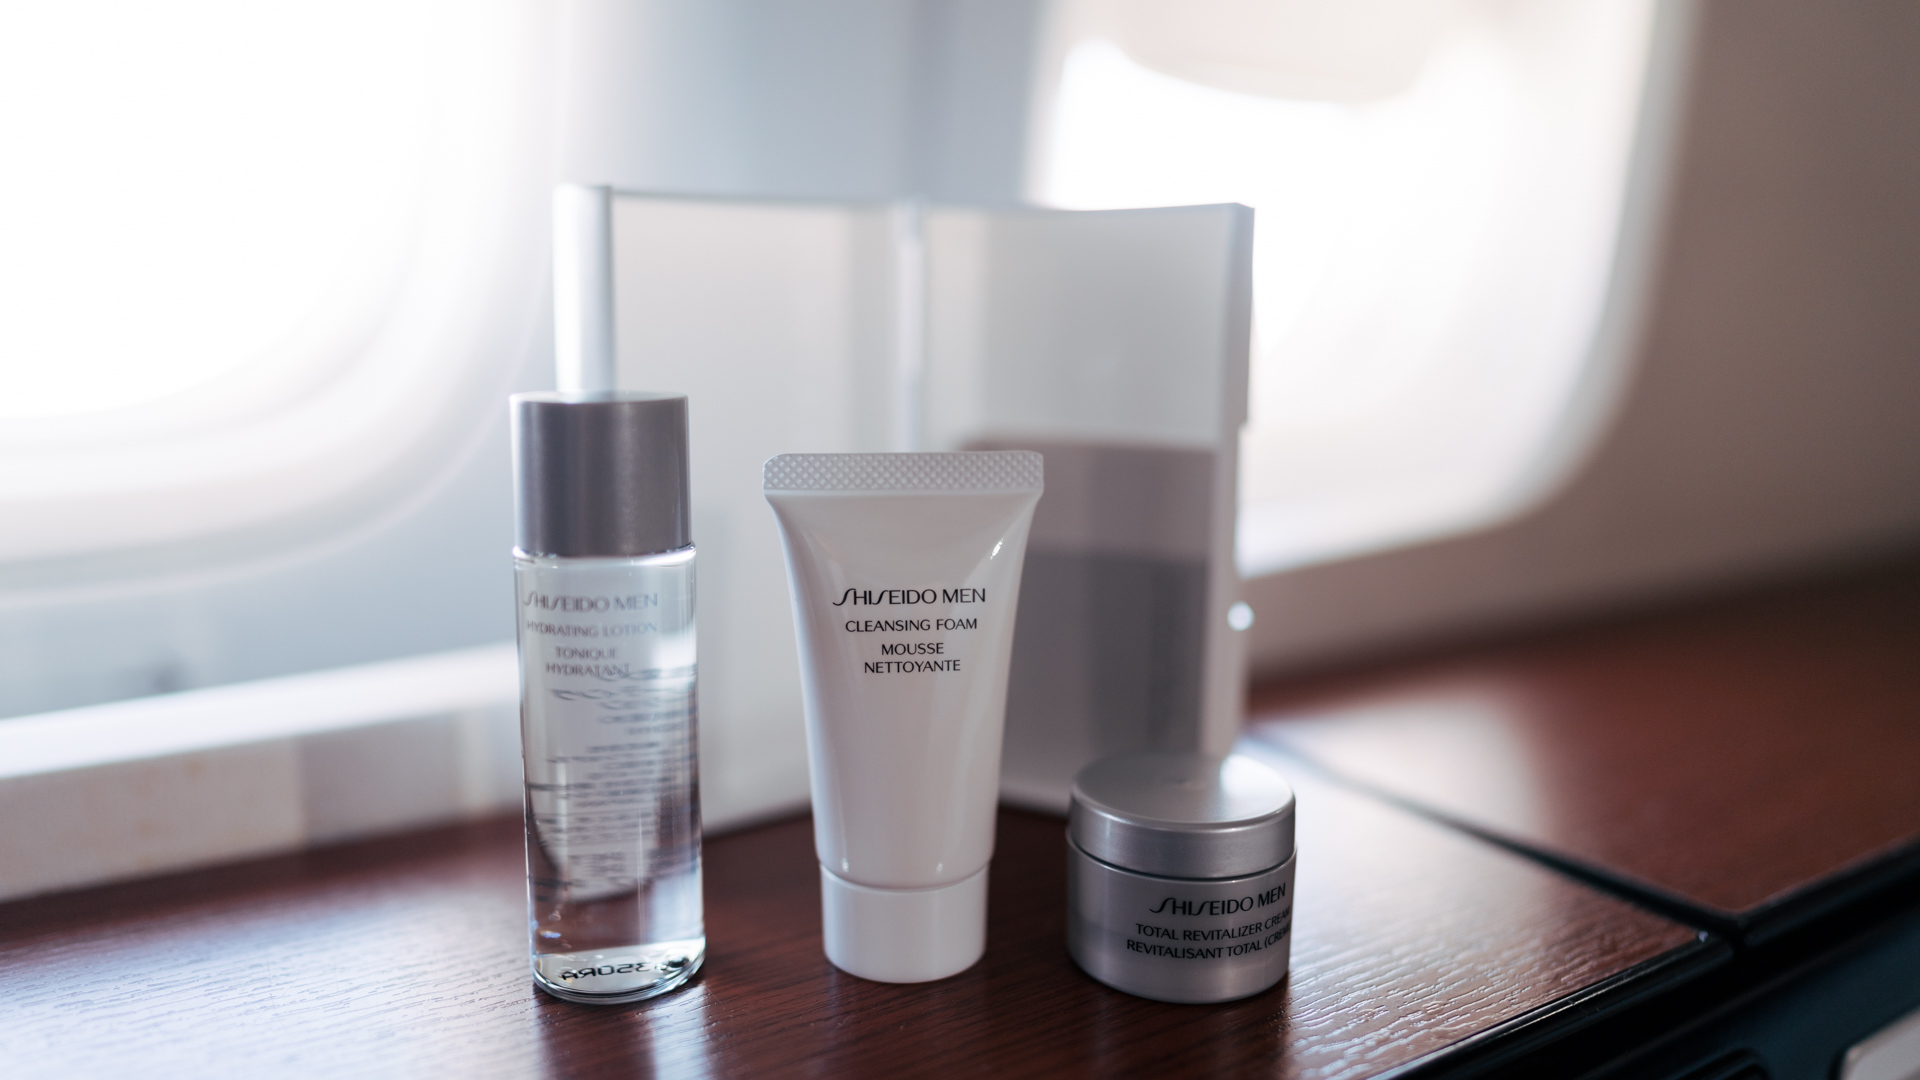 Japan Airlines Boeing 777 First Class Shiseido products